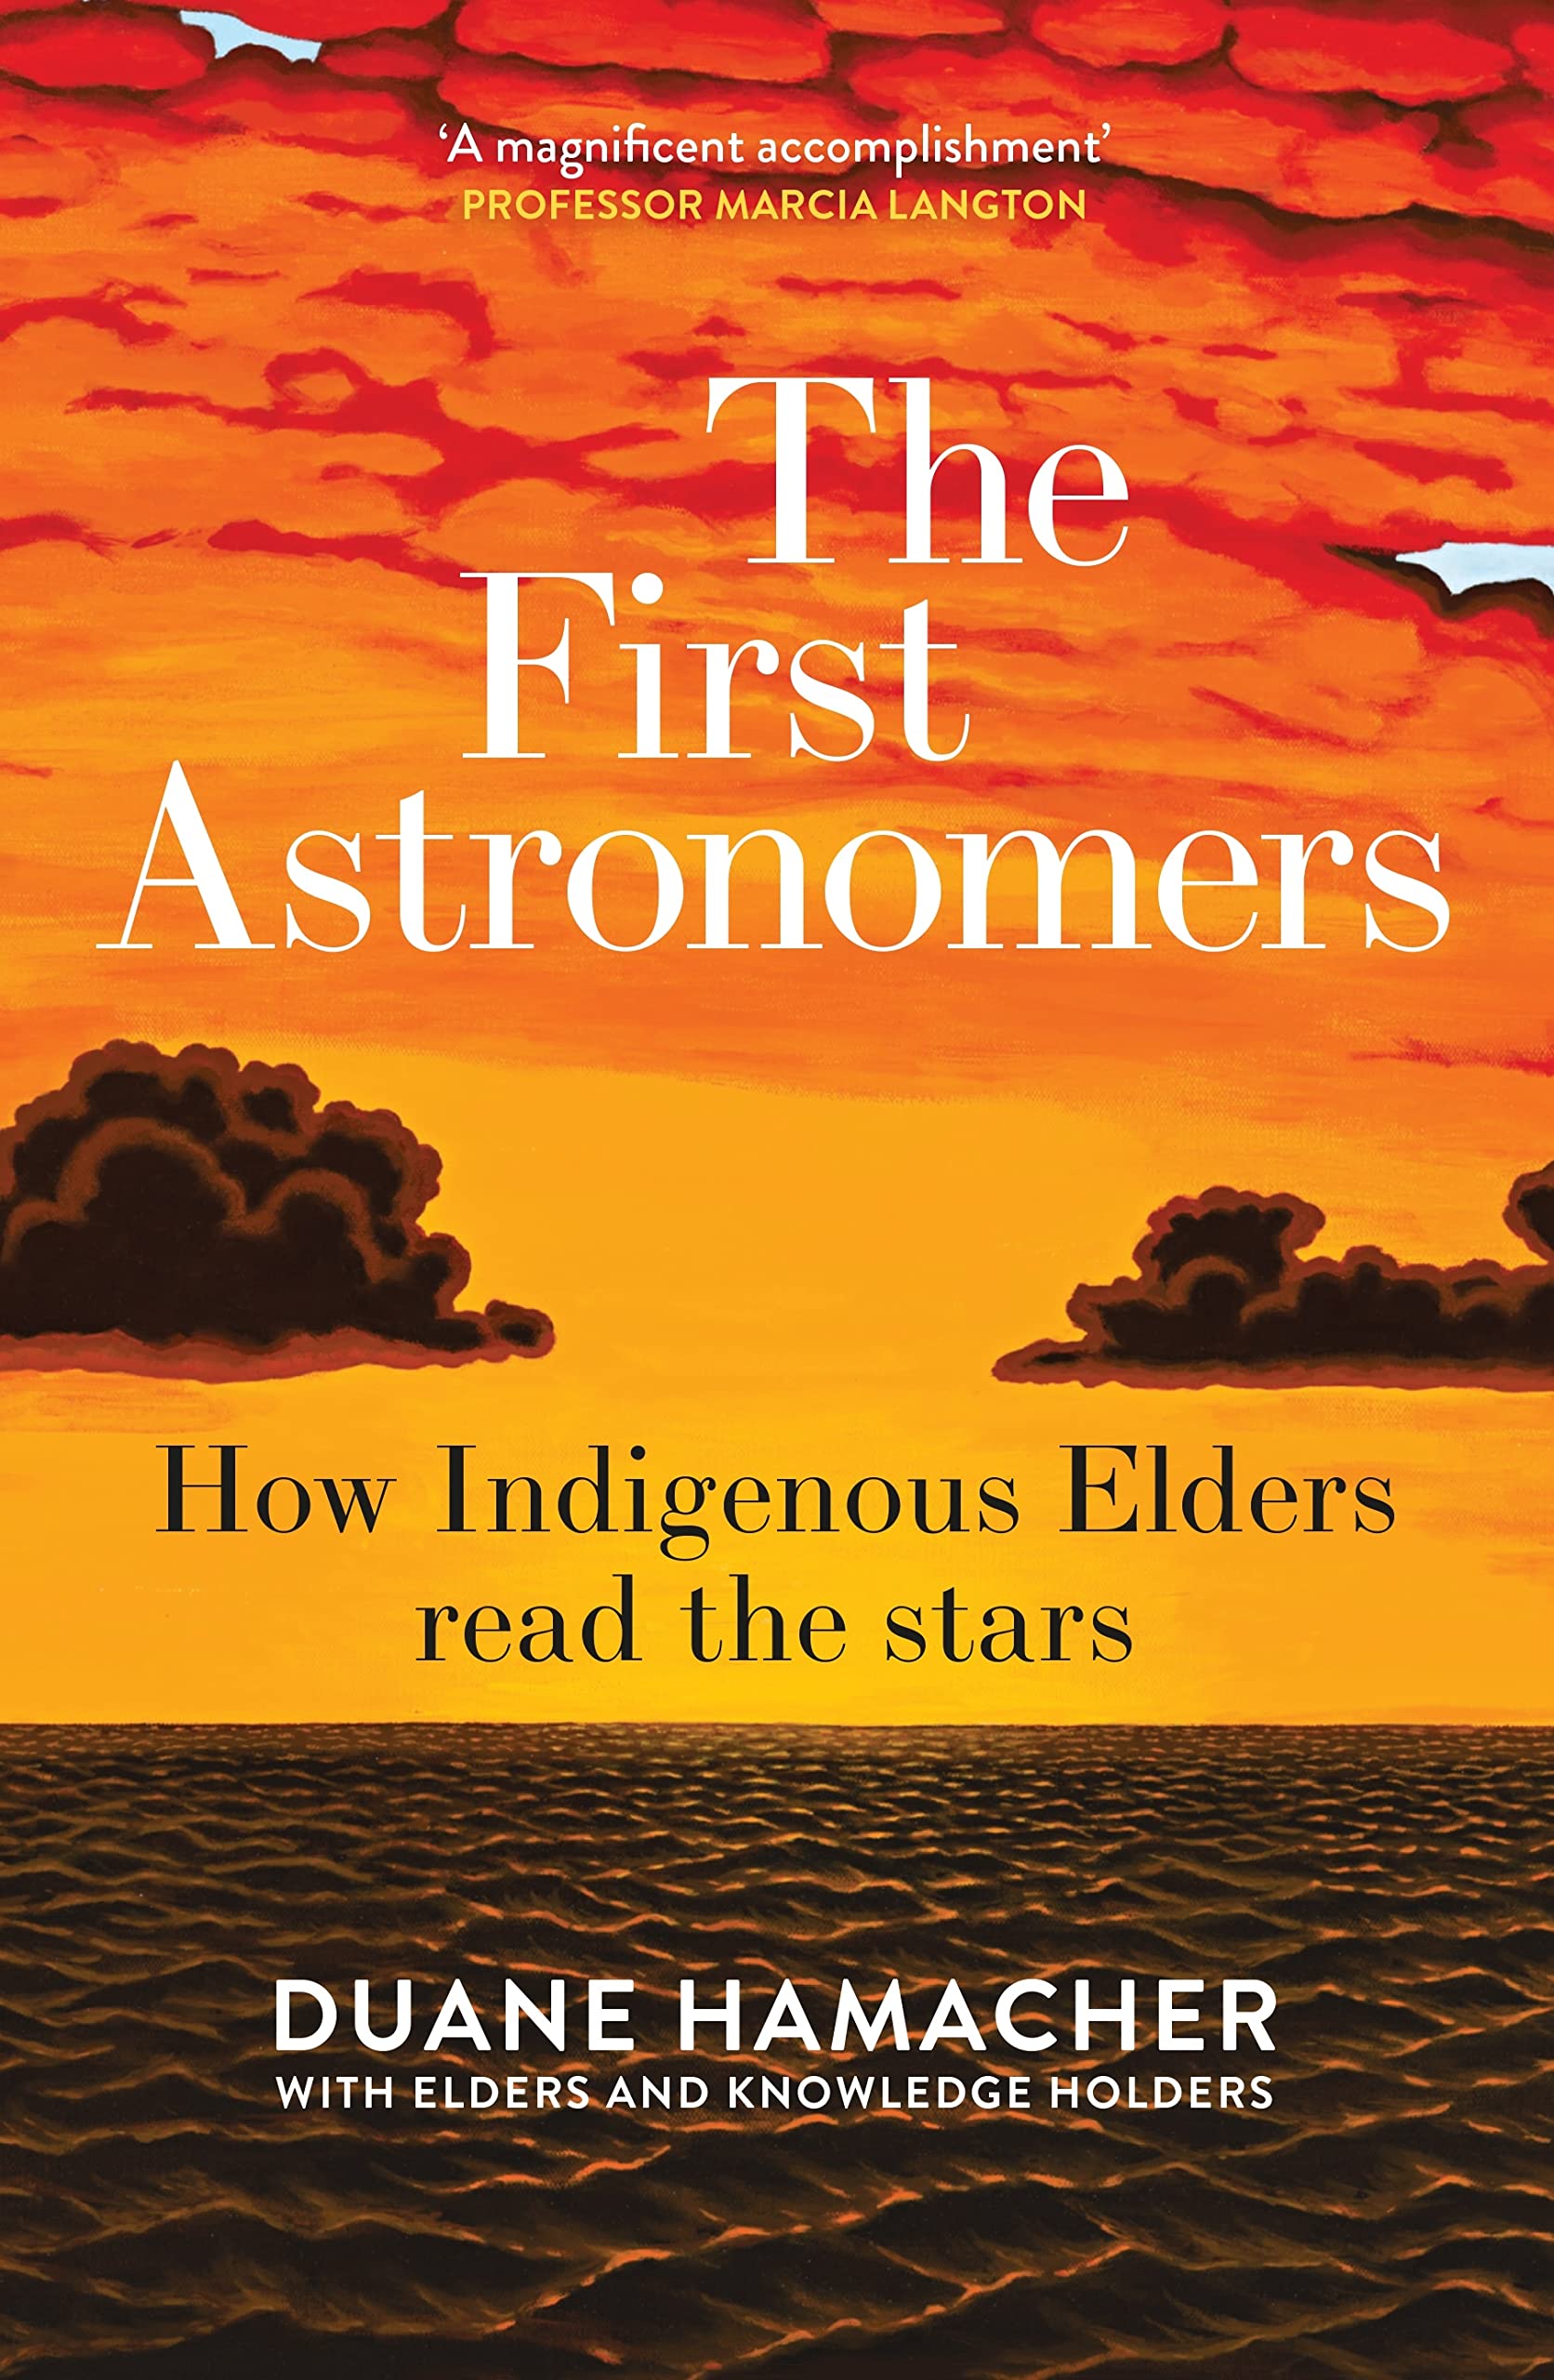 The First Astronomers | Duane Hamacher